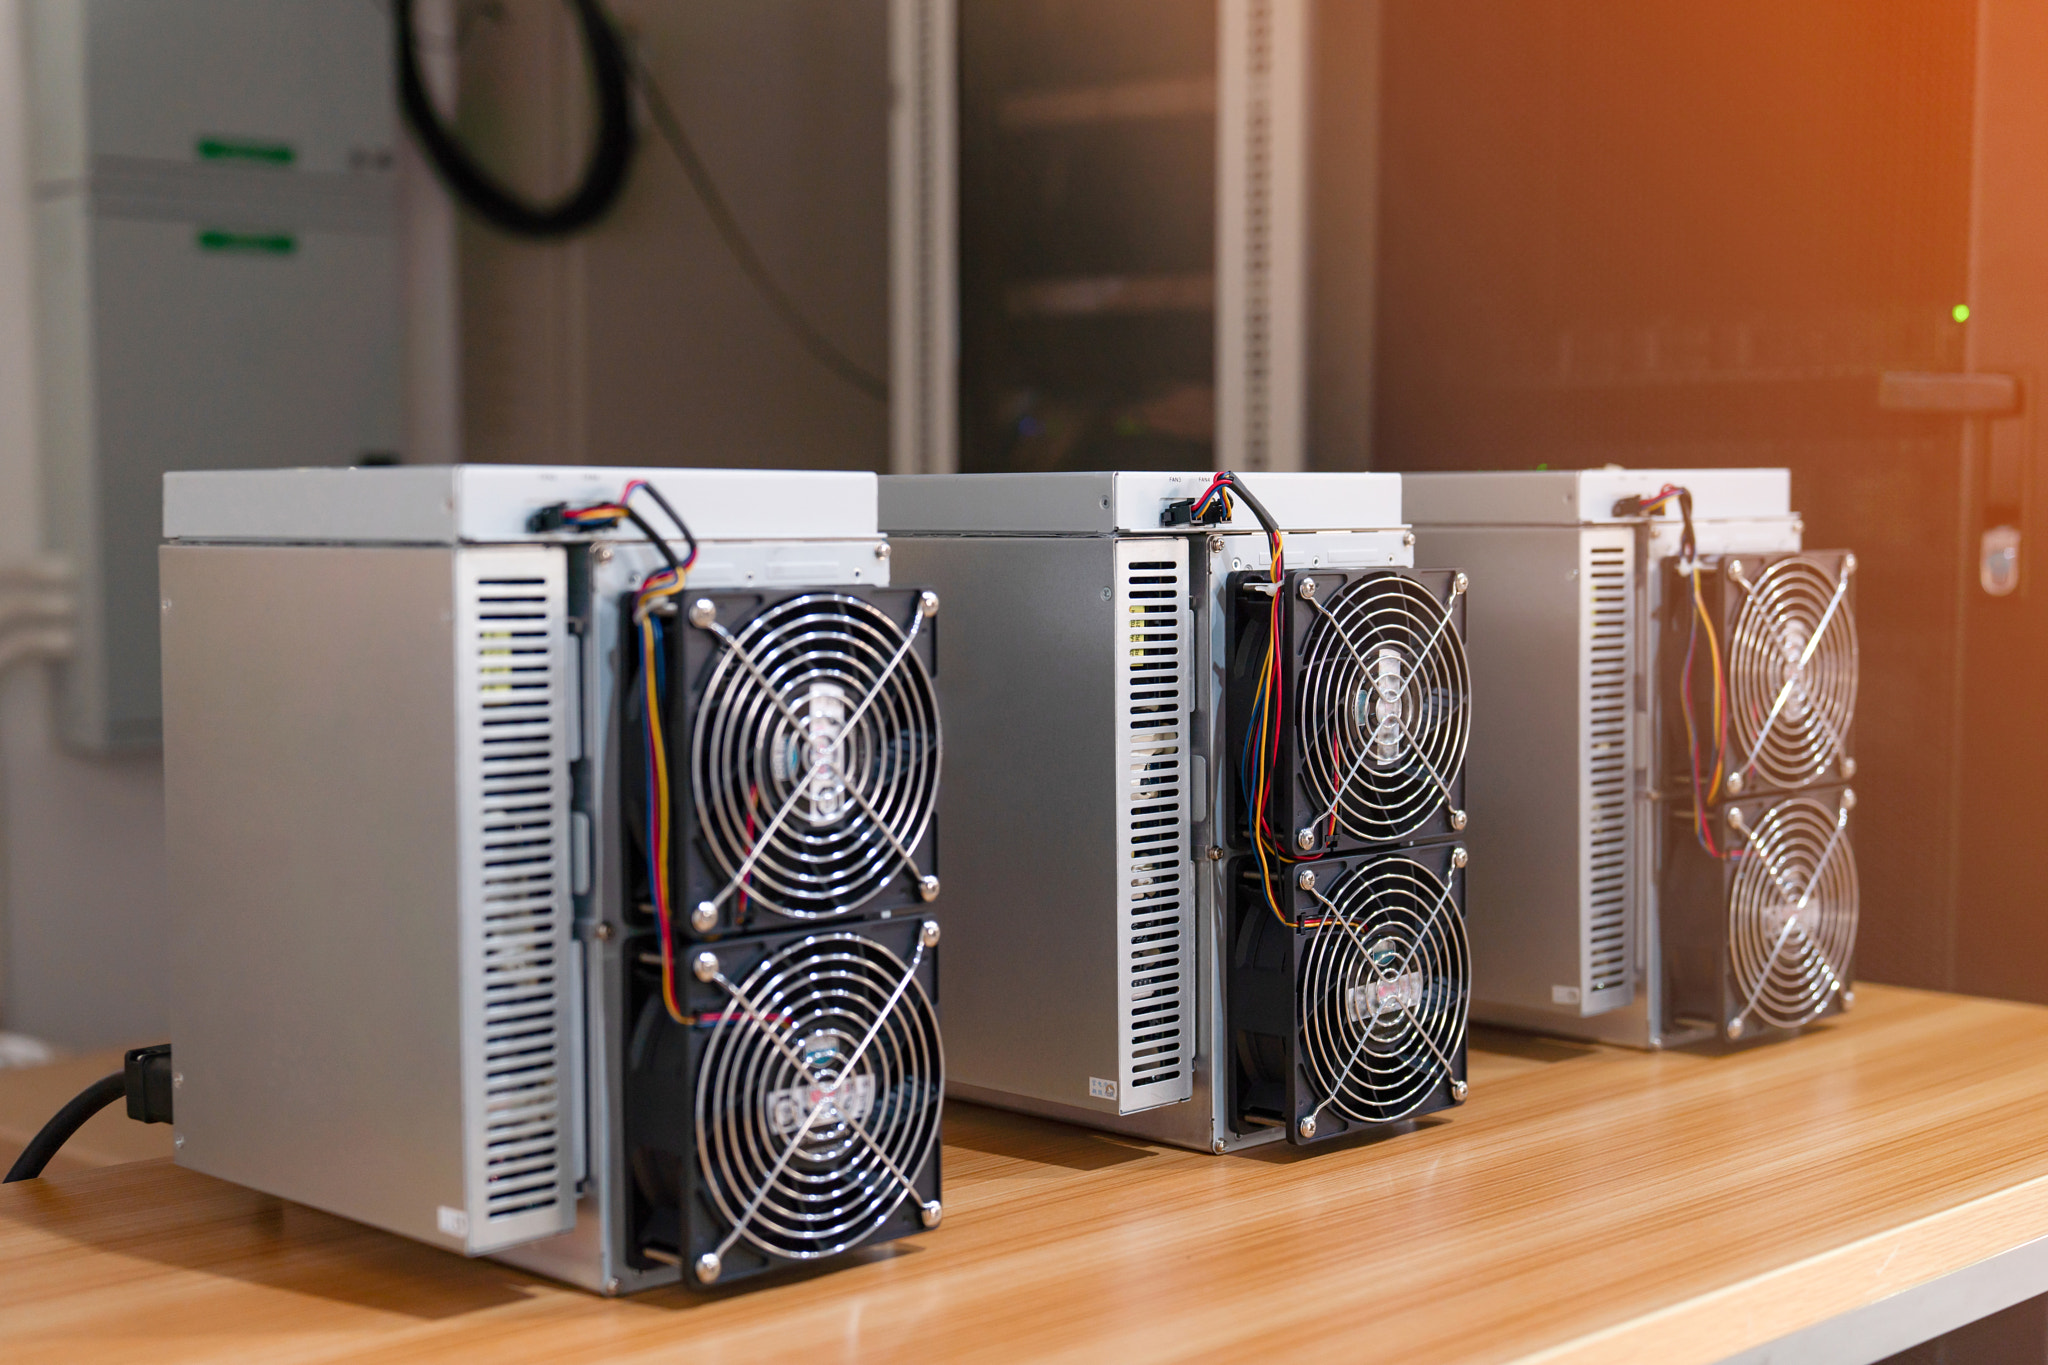 cryptocurrency mining rig for beginner investors.